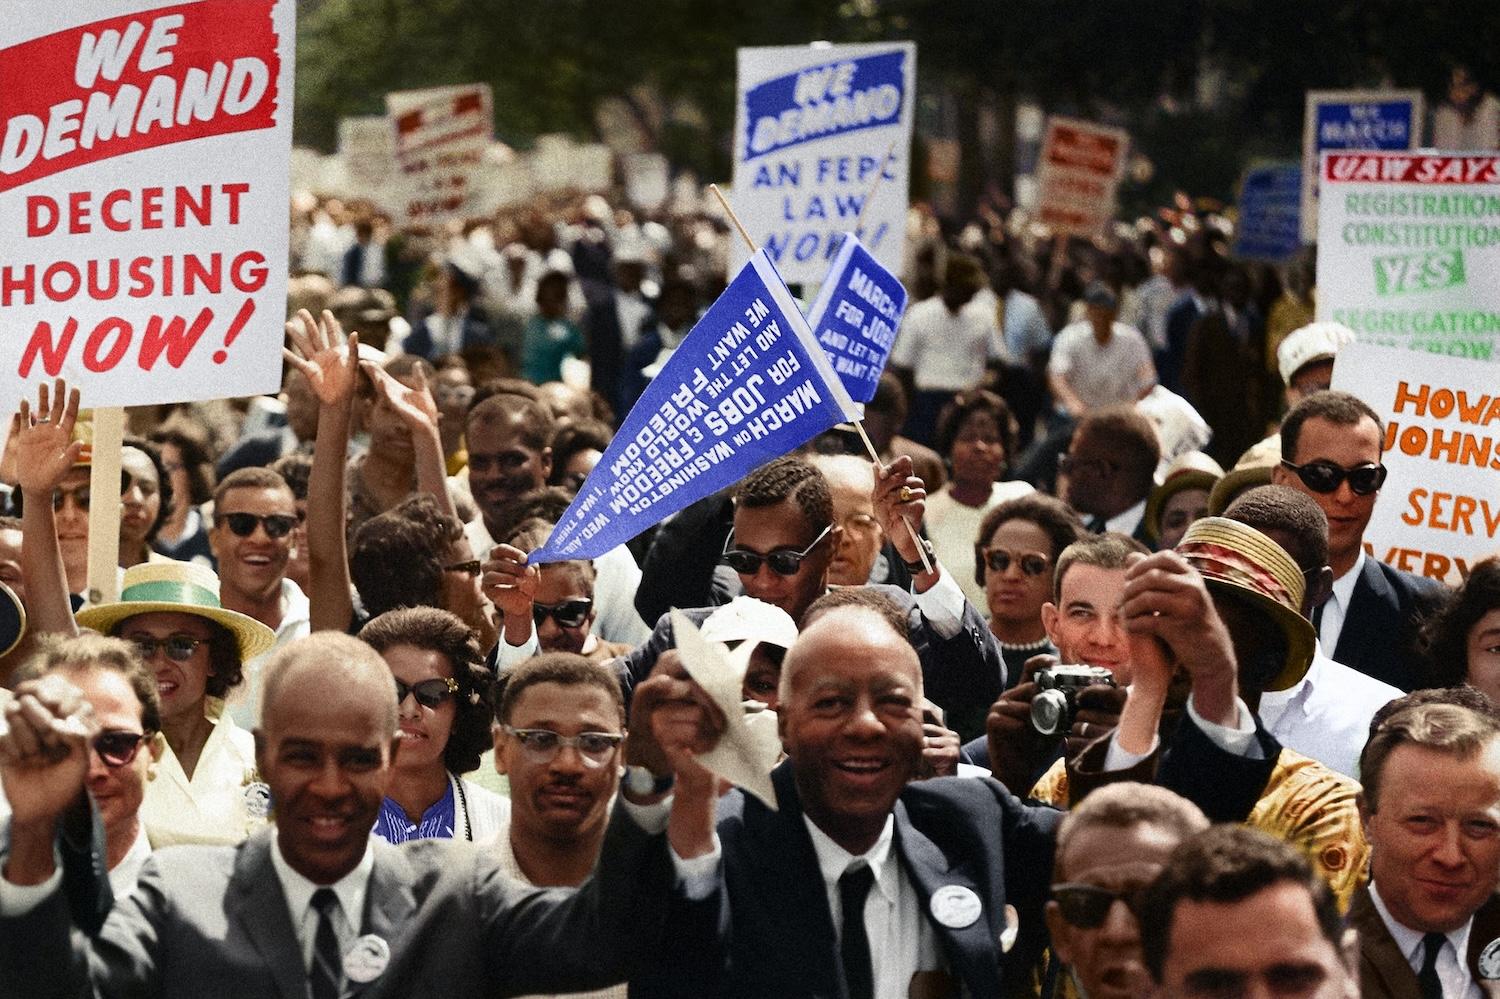 demonstrators attend the 1963 March on Washington - one sign reads 'we demand decent housing now' 